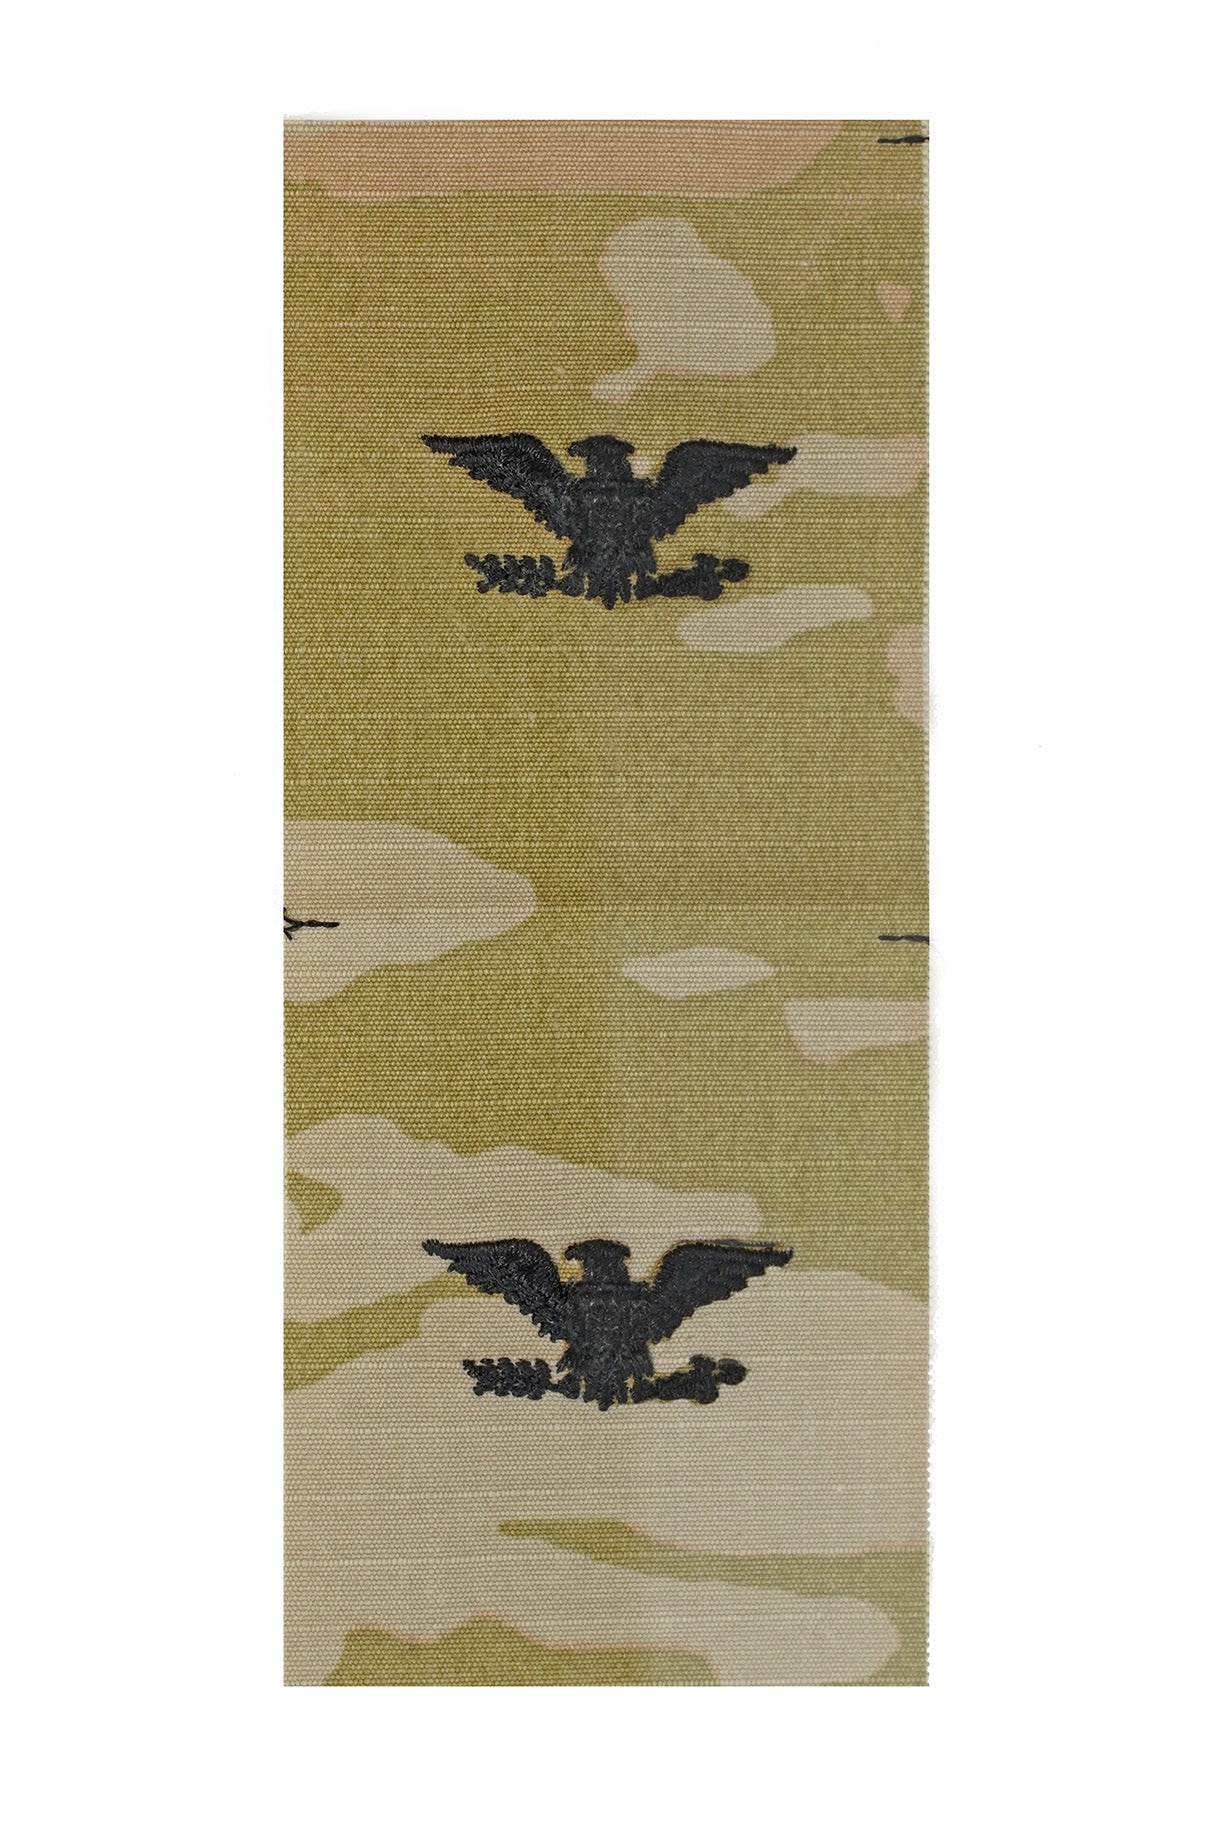 US Army O6 Colonel OCP Sew-on for Cap “Only” (pair)